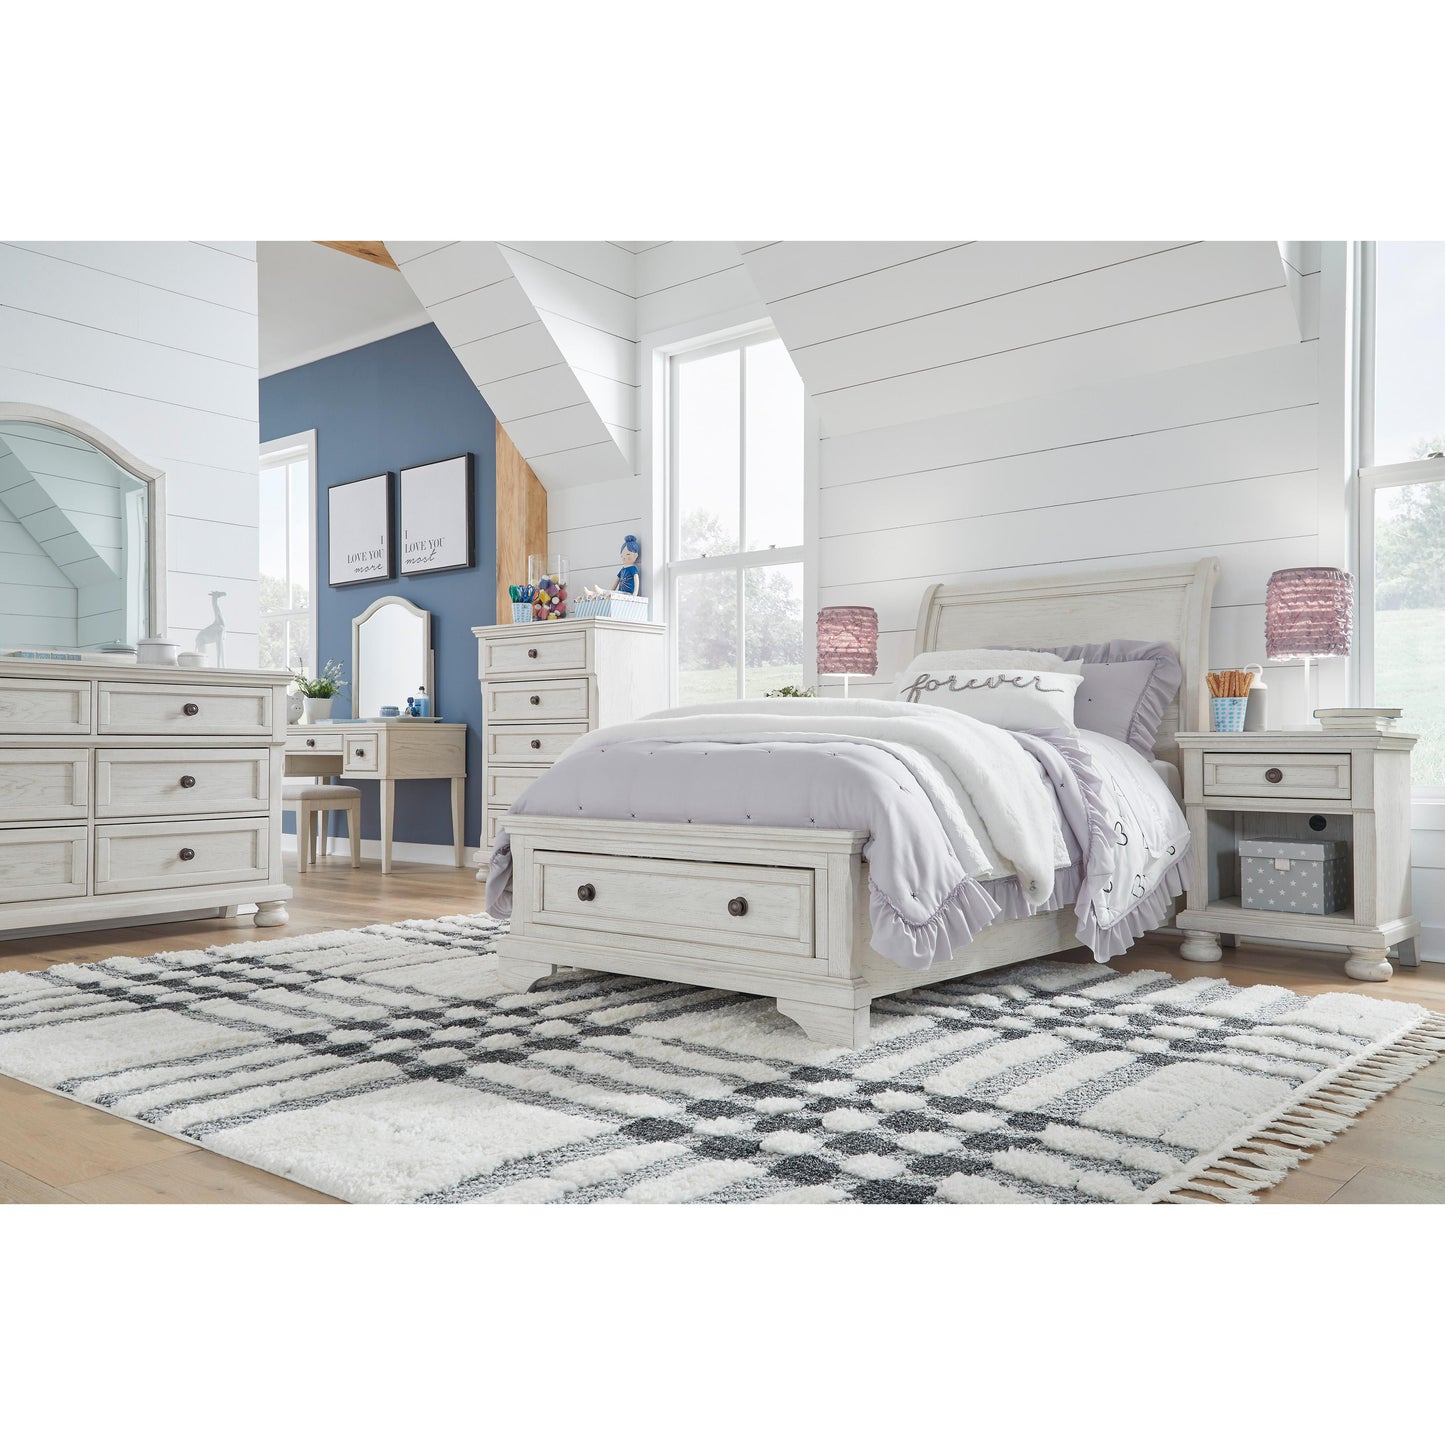 Signature Design by Ashley Kids Beds Bed B742-53/B742-52S/B742-183 IMAGE 6